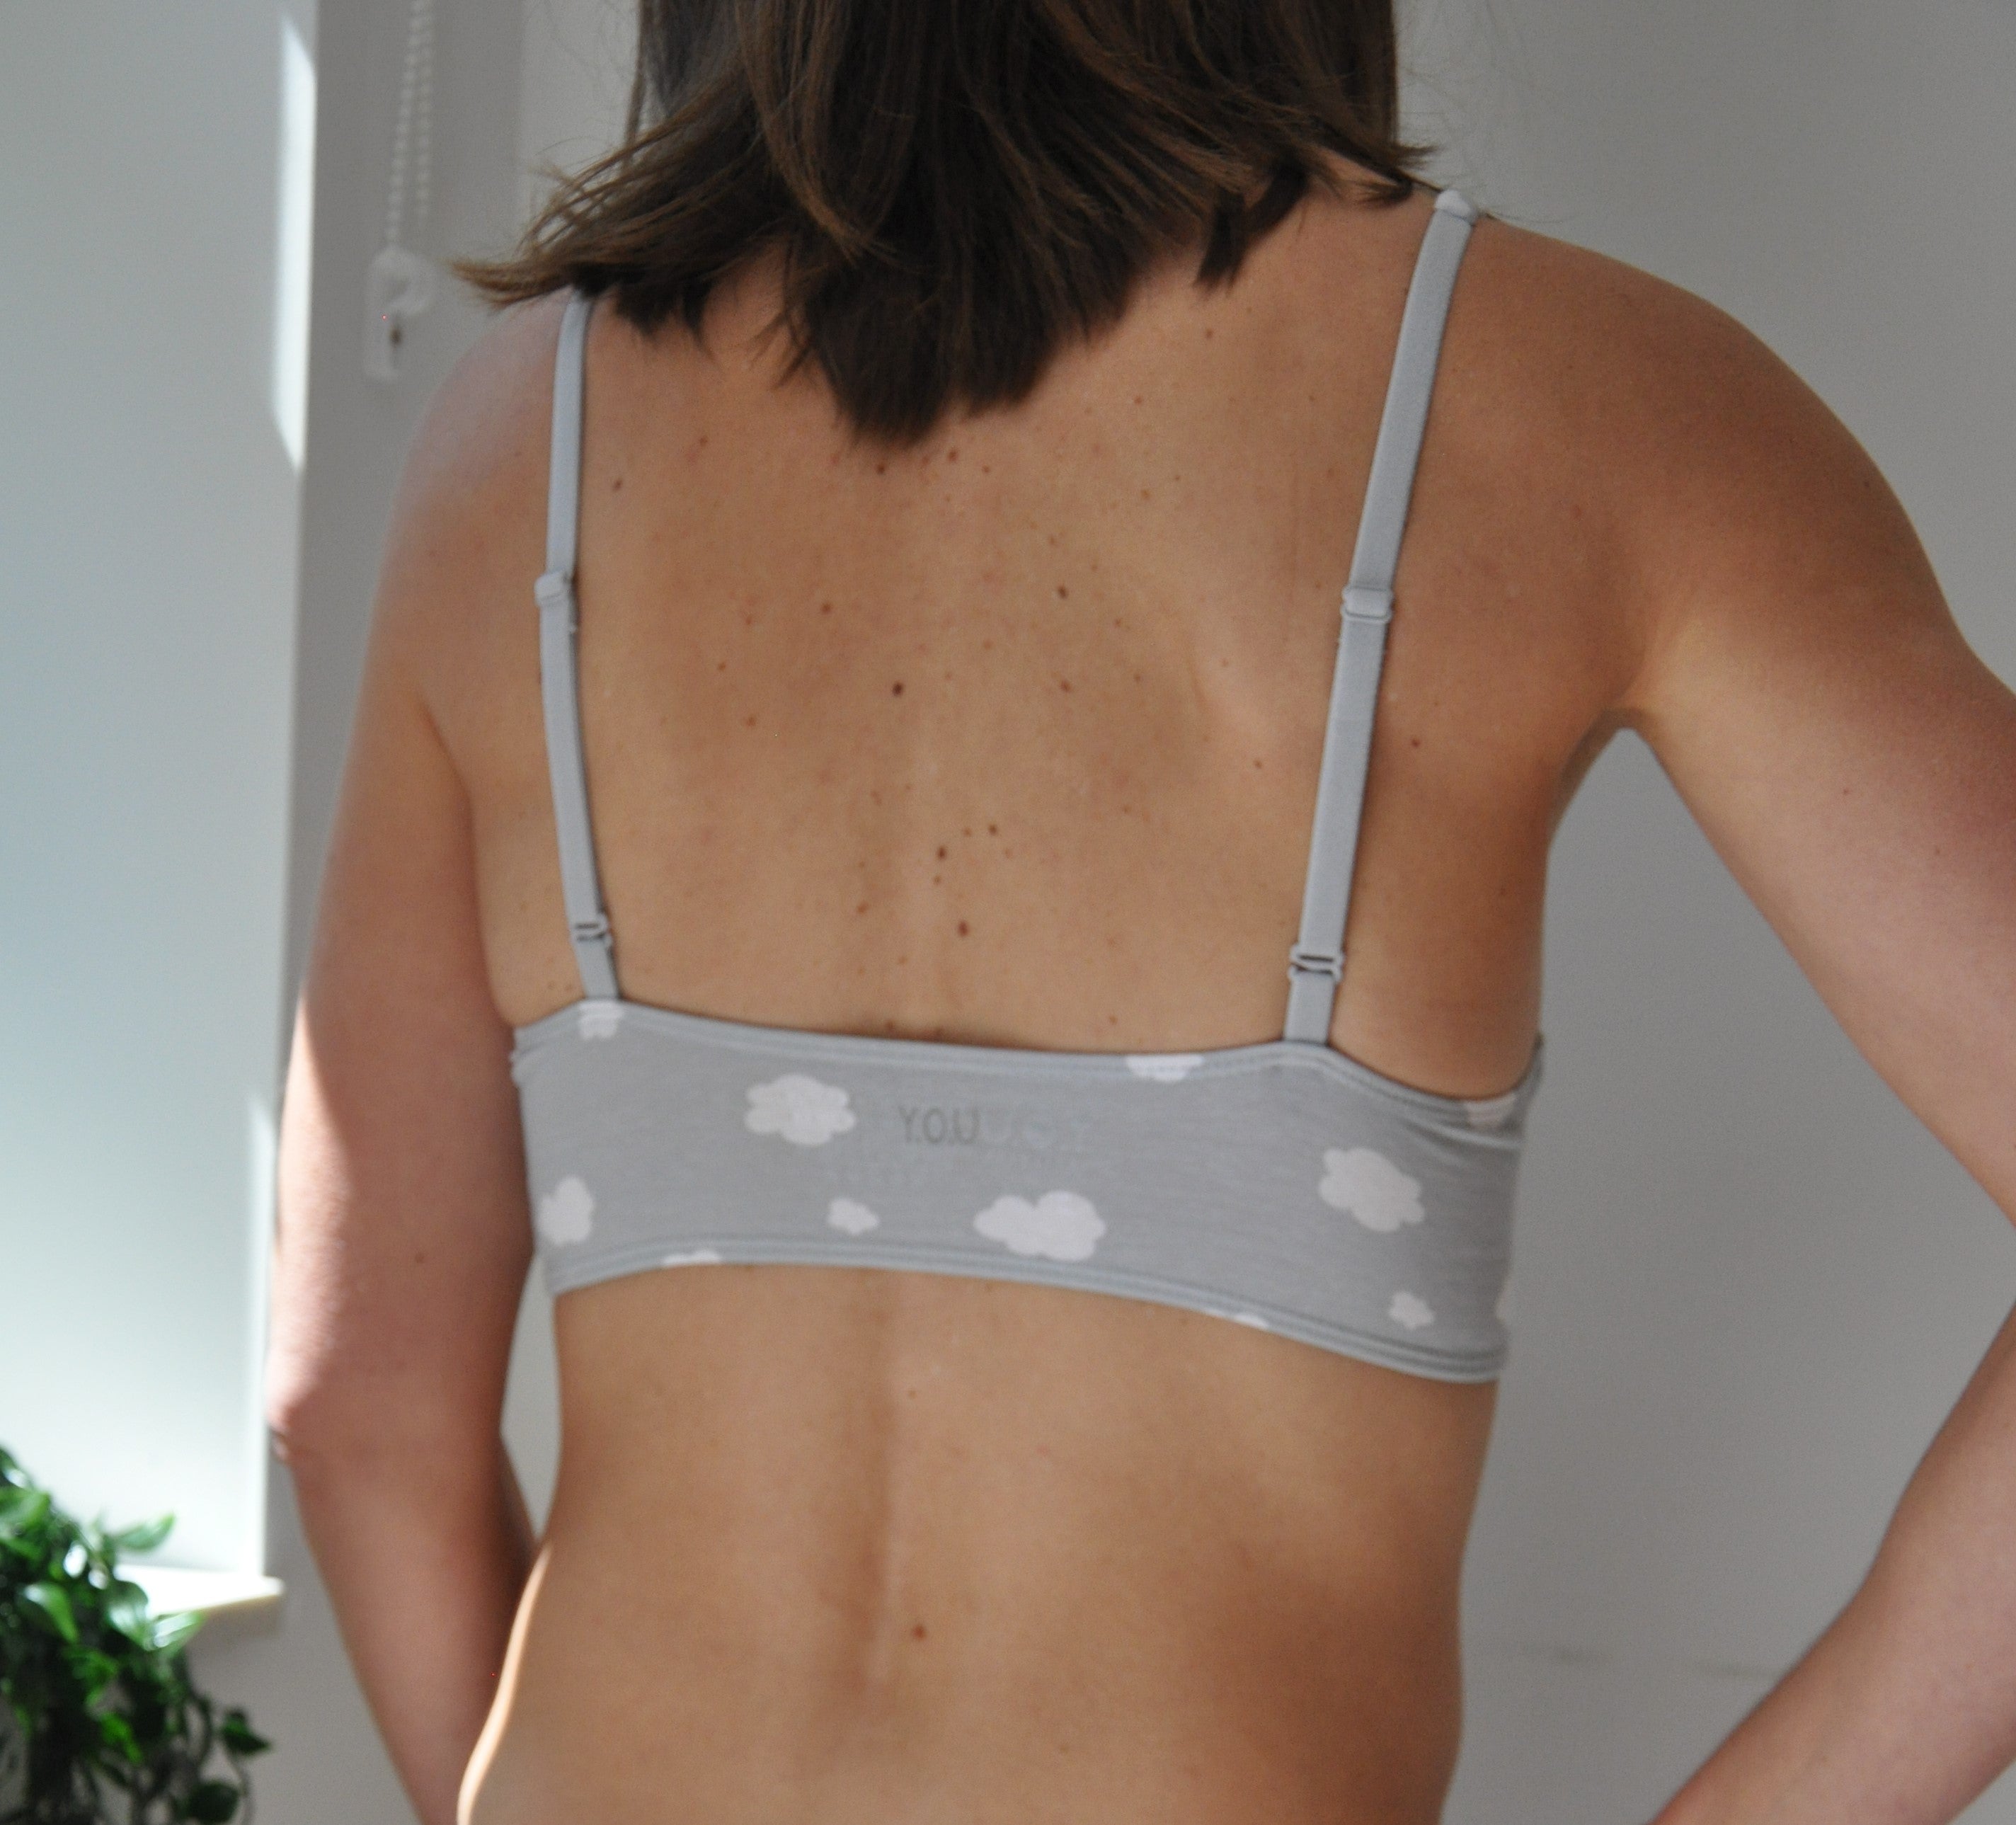 Women's organic cotton bralette in a light grey with white clouds pattern